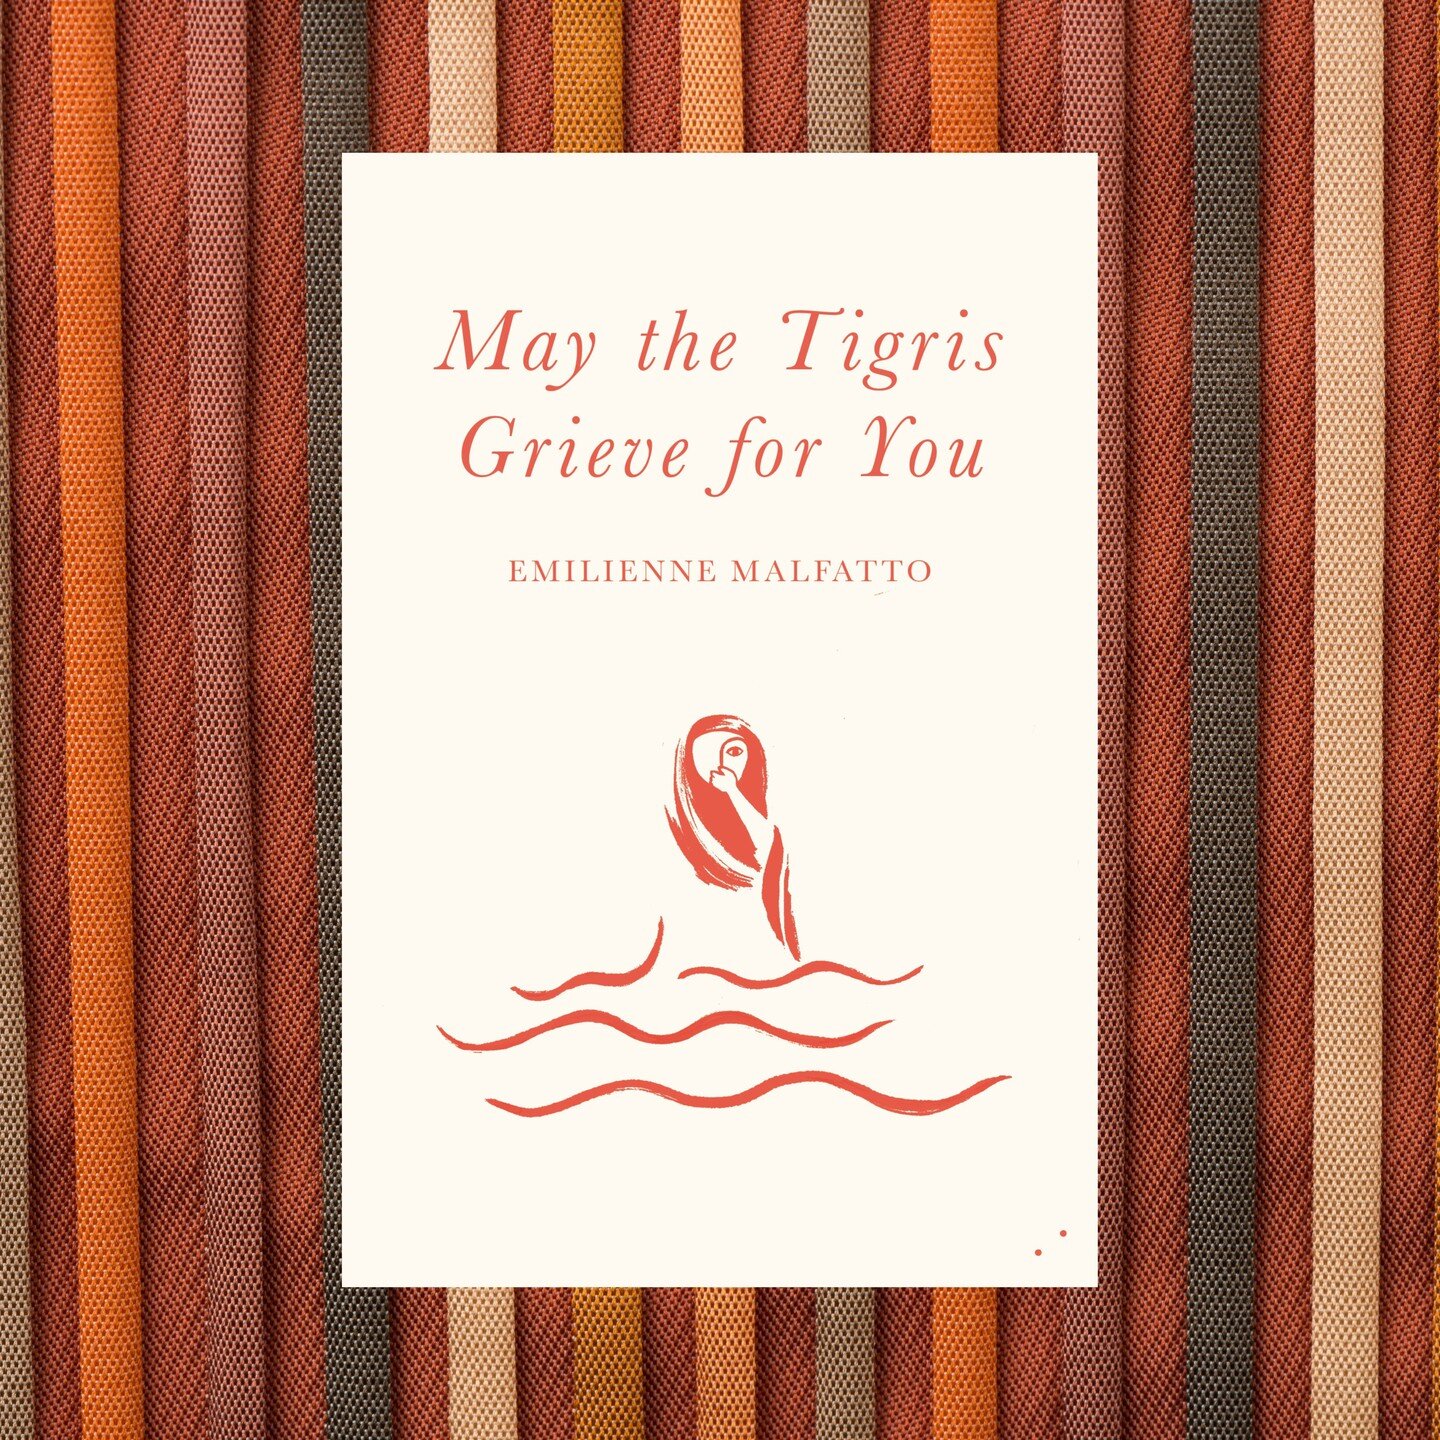 2024 Longlist: Congratulations! 

May the Tigris Grieve for You by Emilienne Malfatto
Translated by Lorna Scott Fox
Les Fugitives

Our judges said: &ldquo;A very powerful little book. It stages the ambiguities, hesitations, fears, and all the grey st